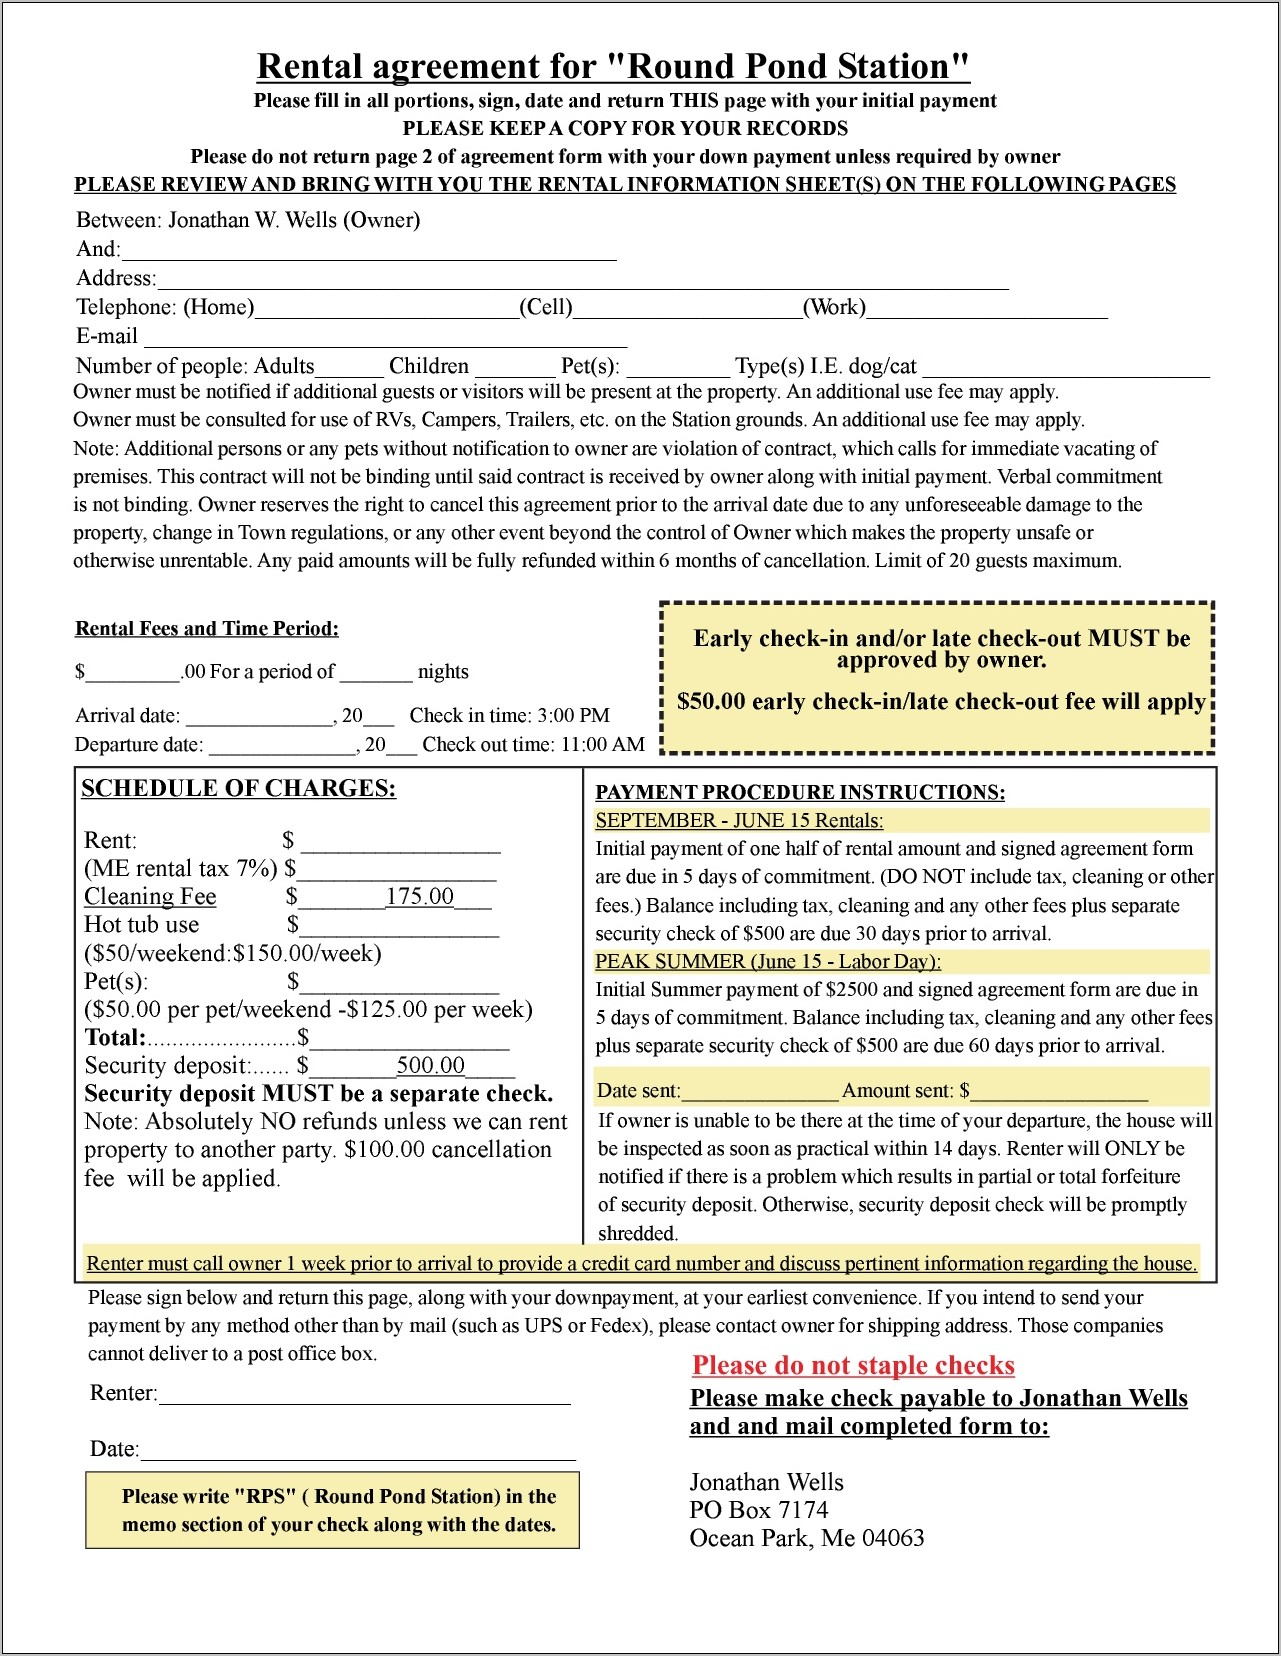 Vehicle Lease Agreement Form Pdf